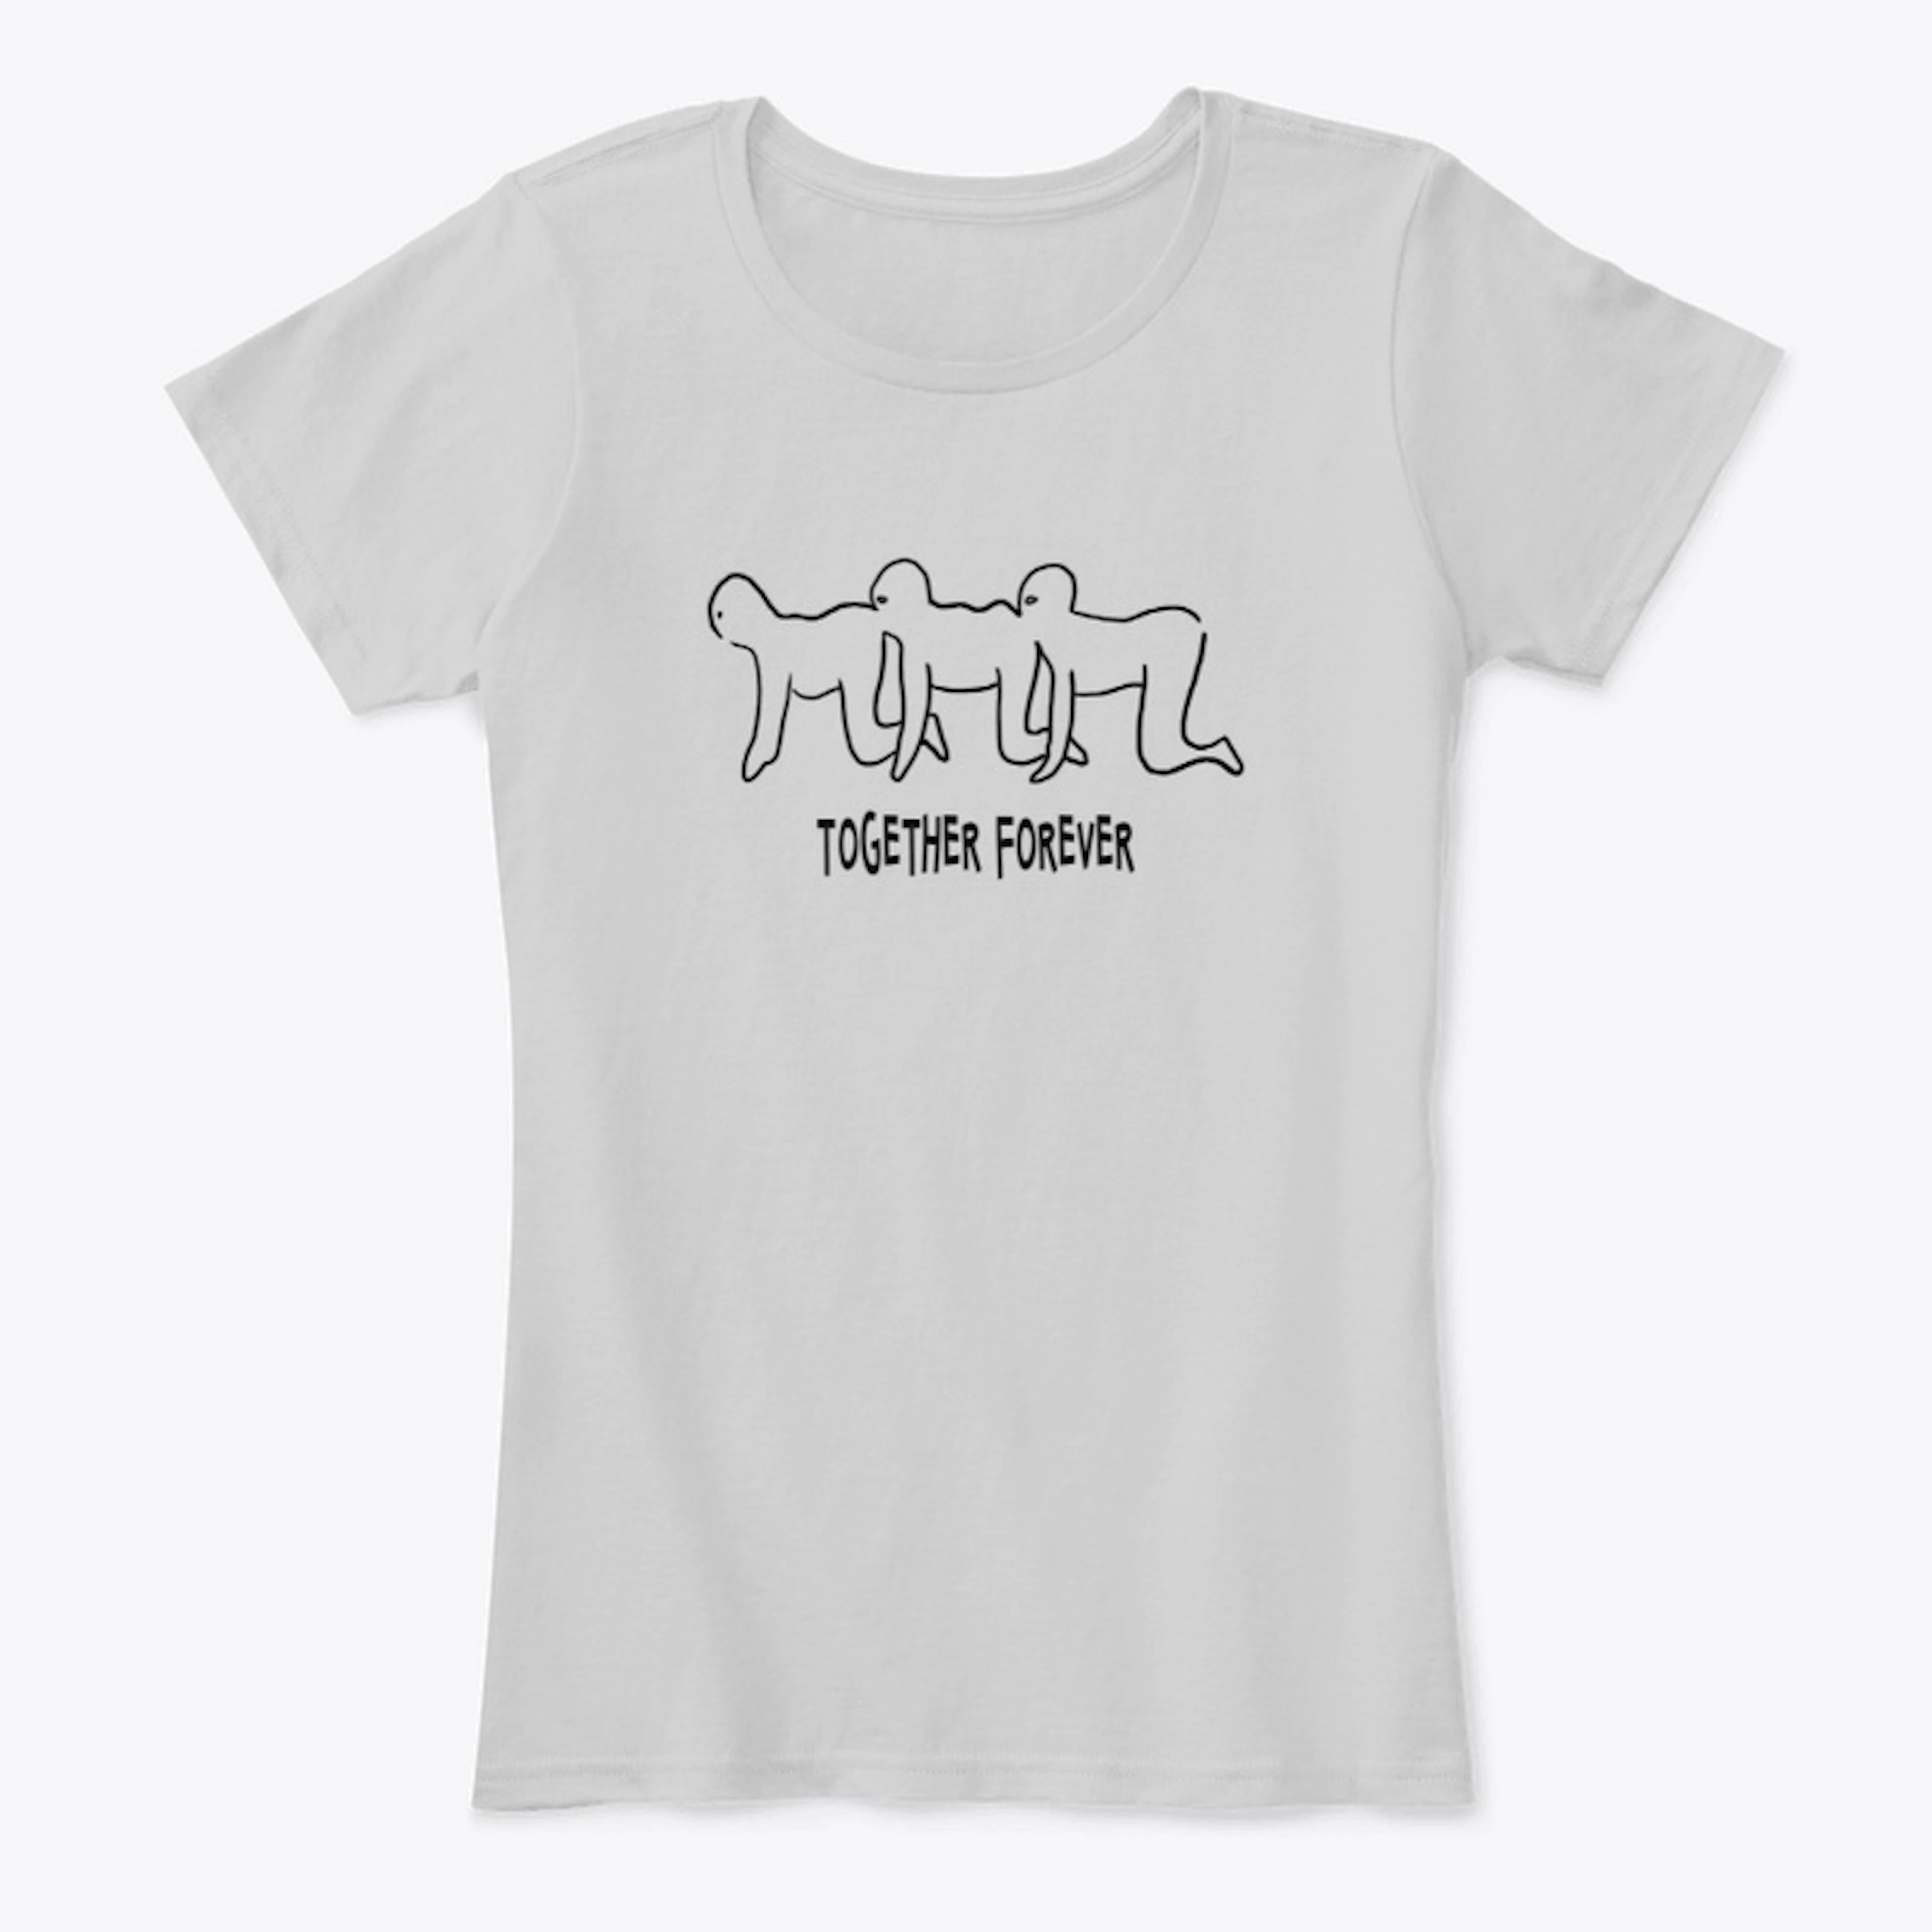 Together forever friendship tee